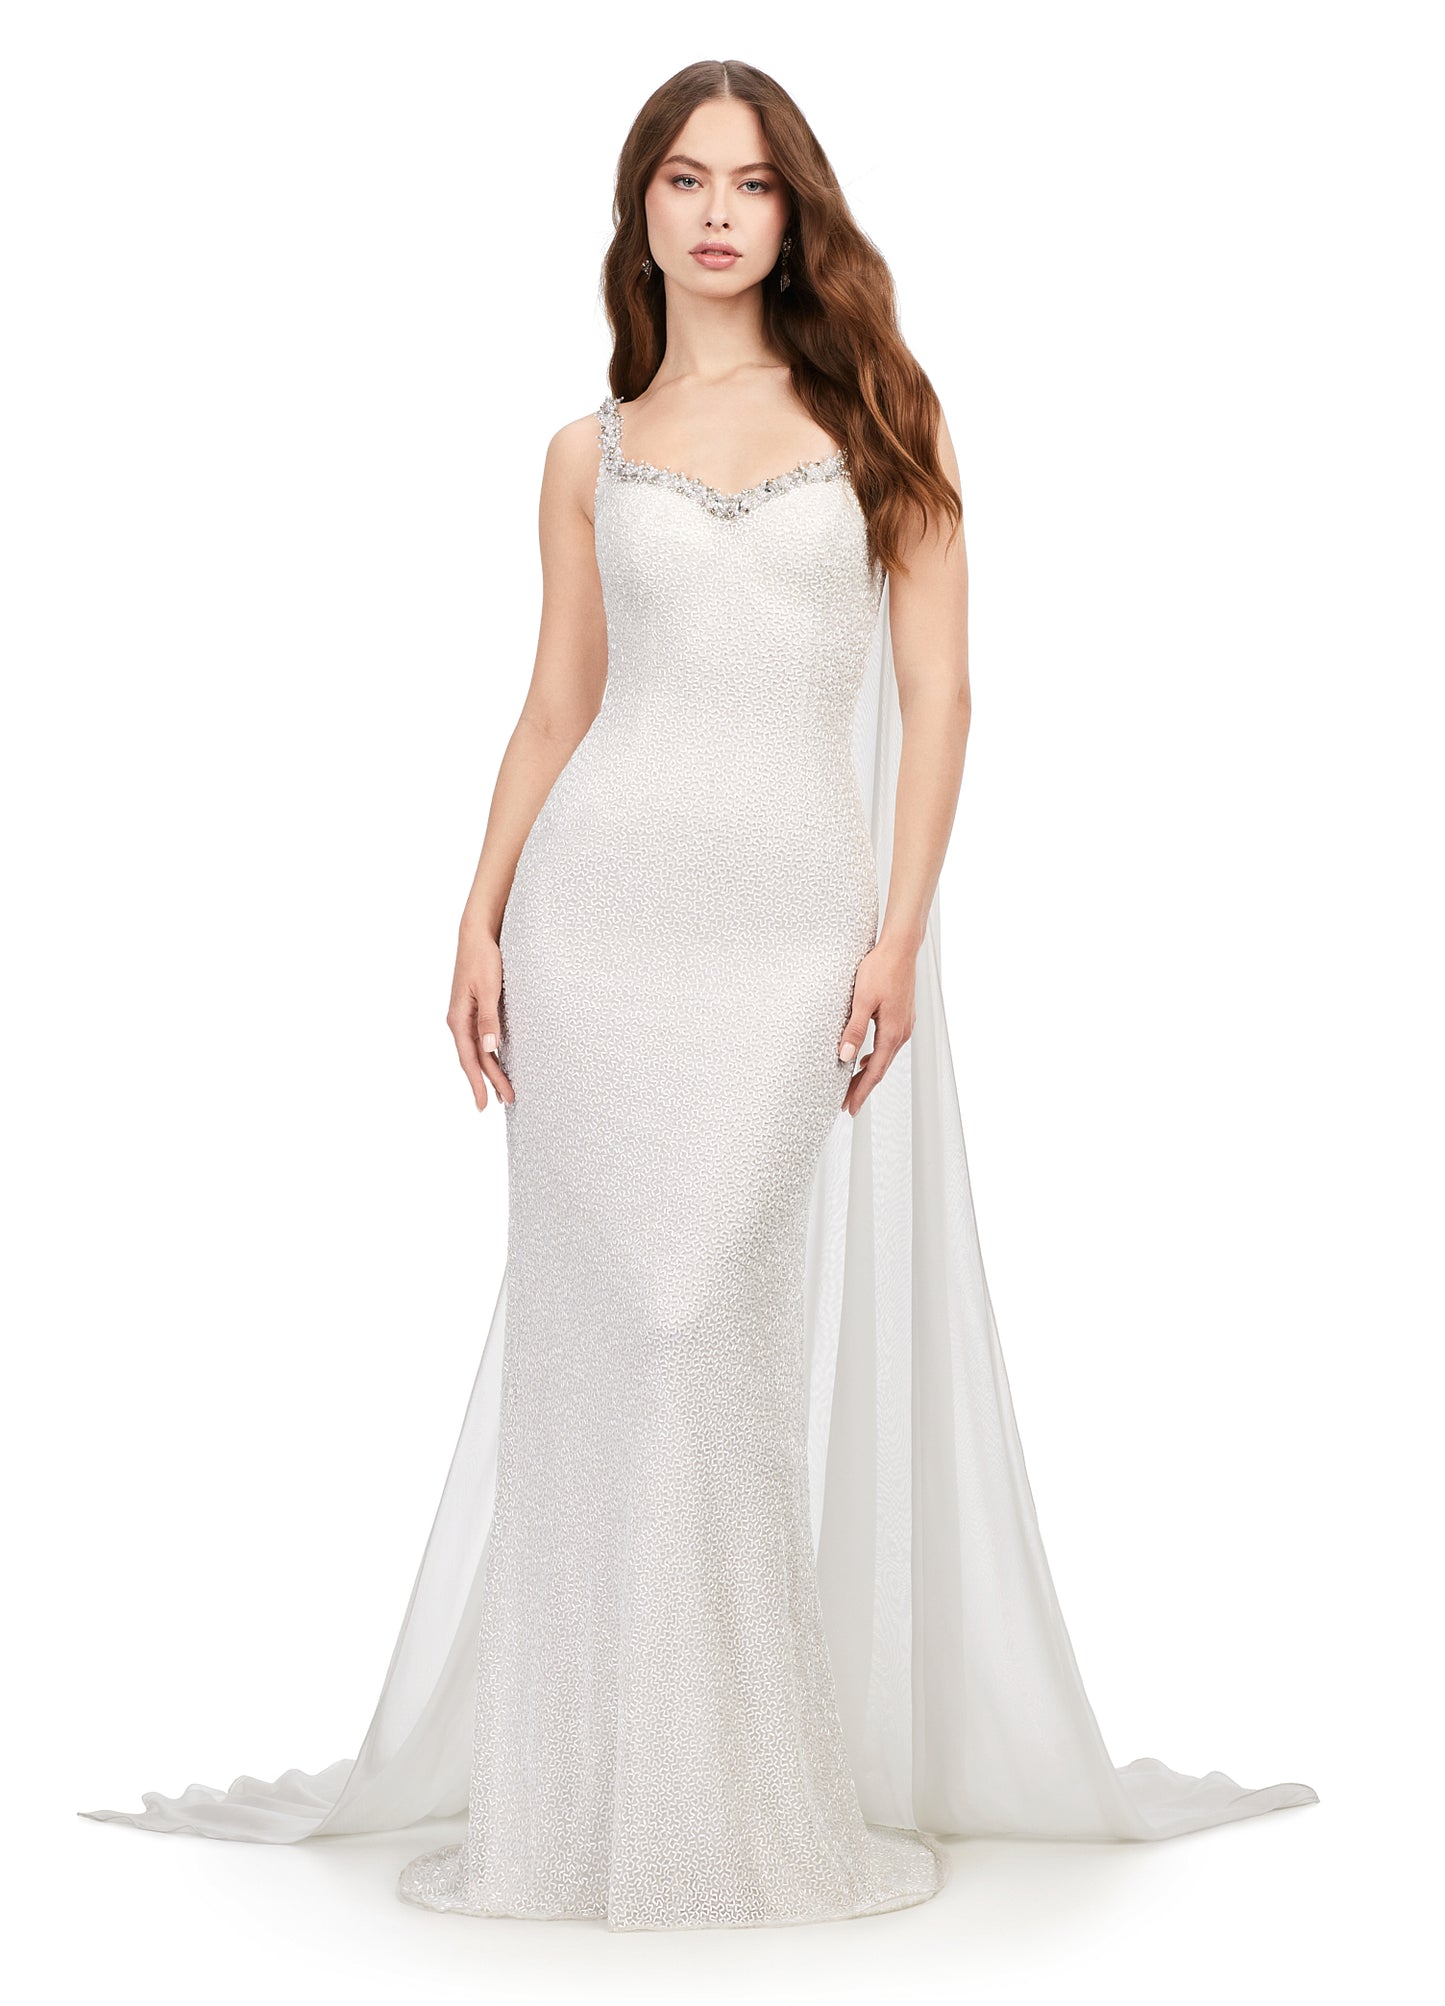 Ashley Lauren 11398 Vermicelli Beaded Gown with Chiffon Cape Crystal Detail Sweetheart Neckline Dress. Talk about stunning! This fully vermicelli beaded gown features crystal adorned straps that continues along the trim of the bustier. The look is complete with a chiffon cape.